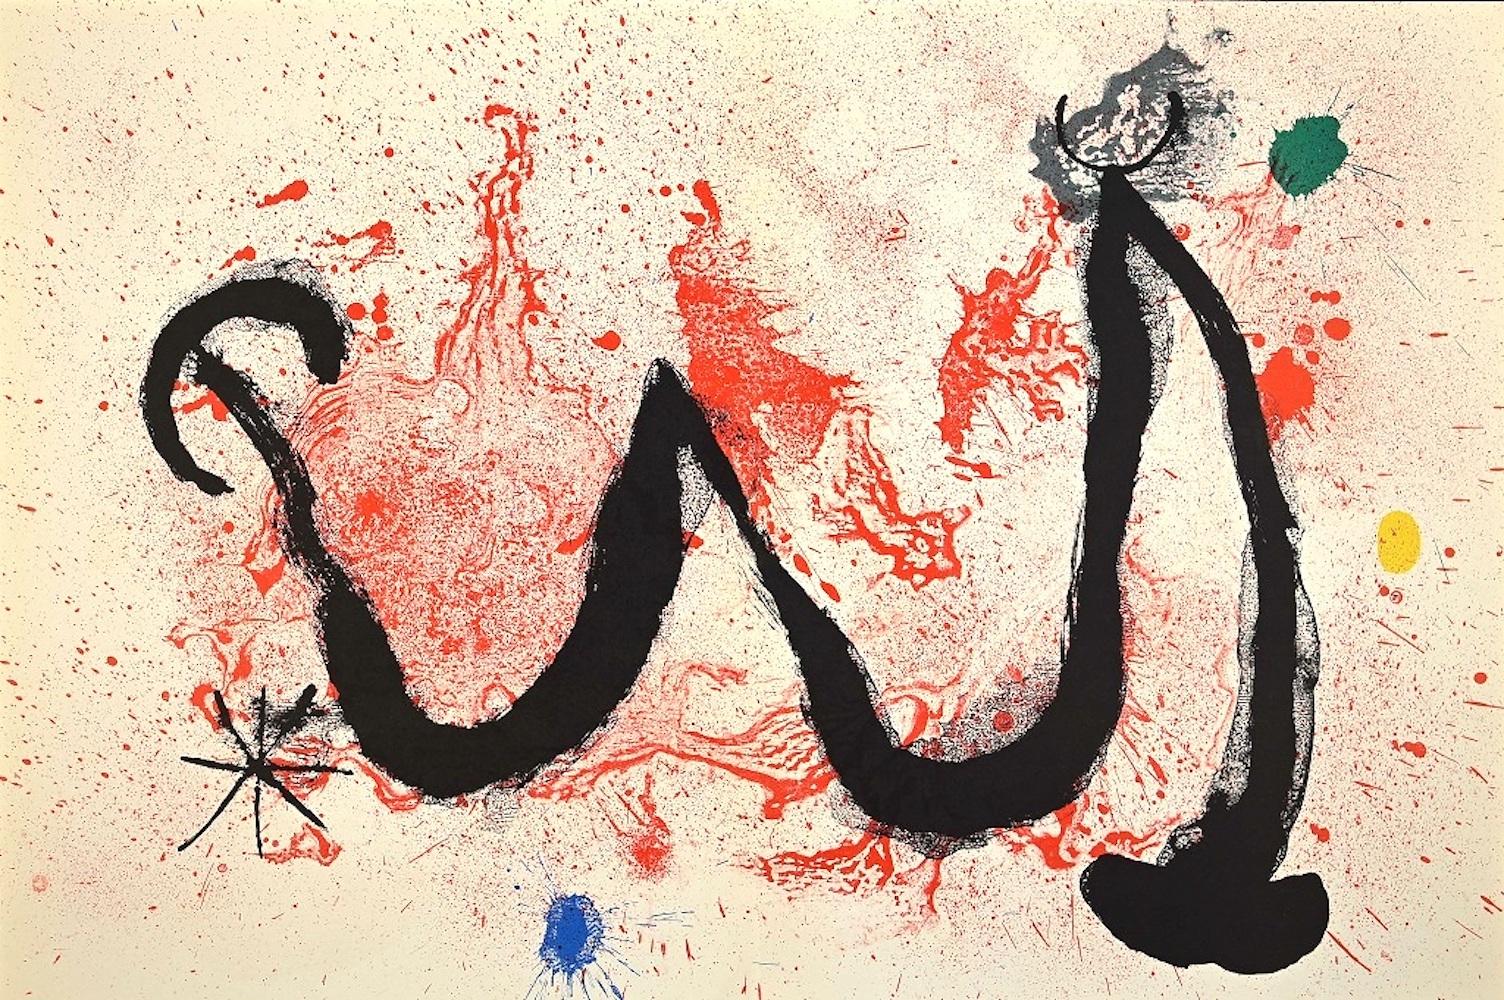 Joan Miró Abstract Print - The Fire Dance from Derriere Le Miroir - Original Lithograph by Joan Mirò - 1963